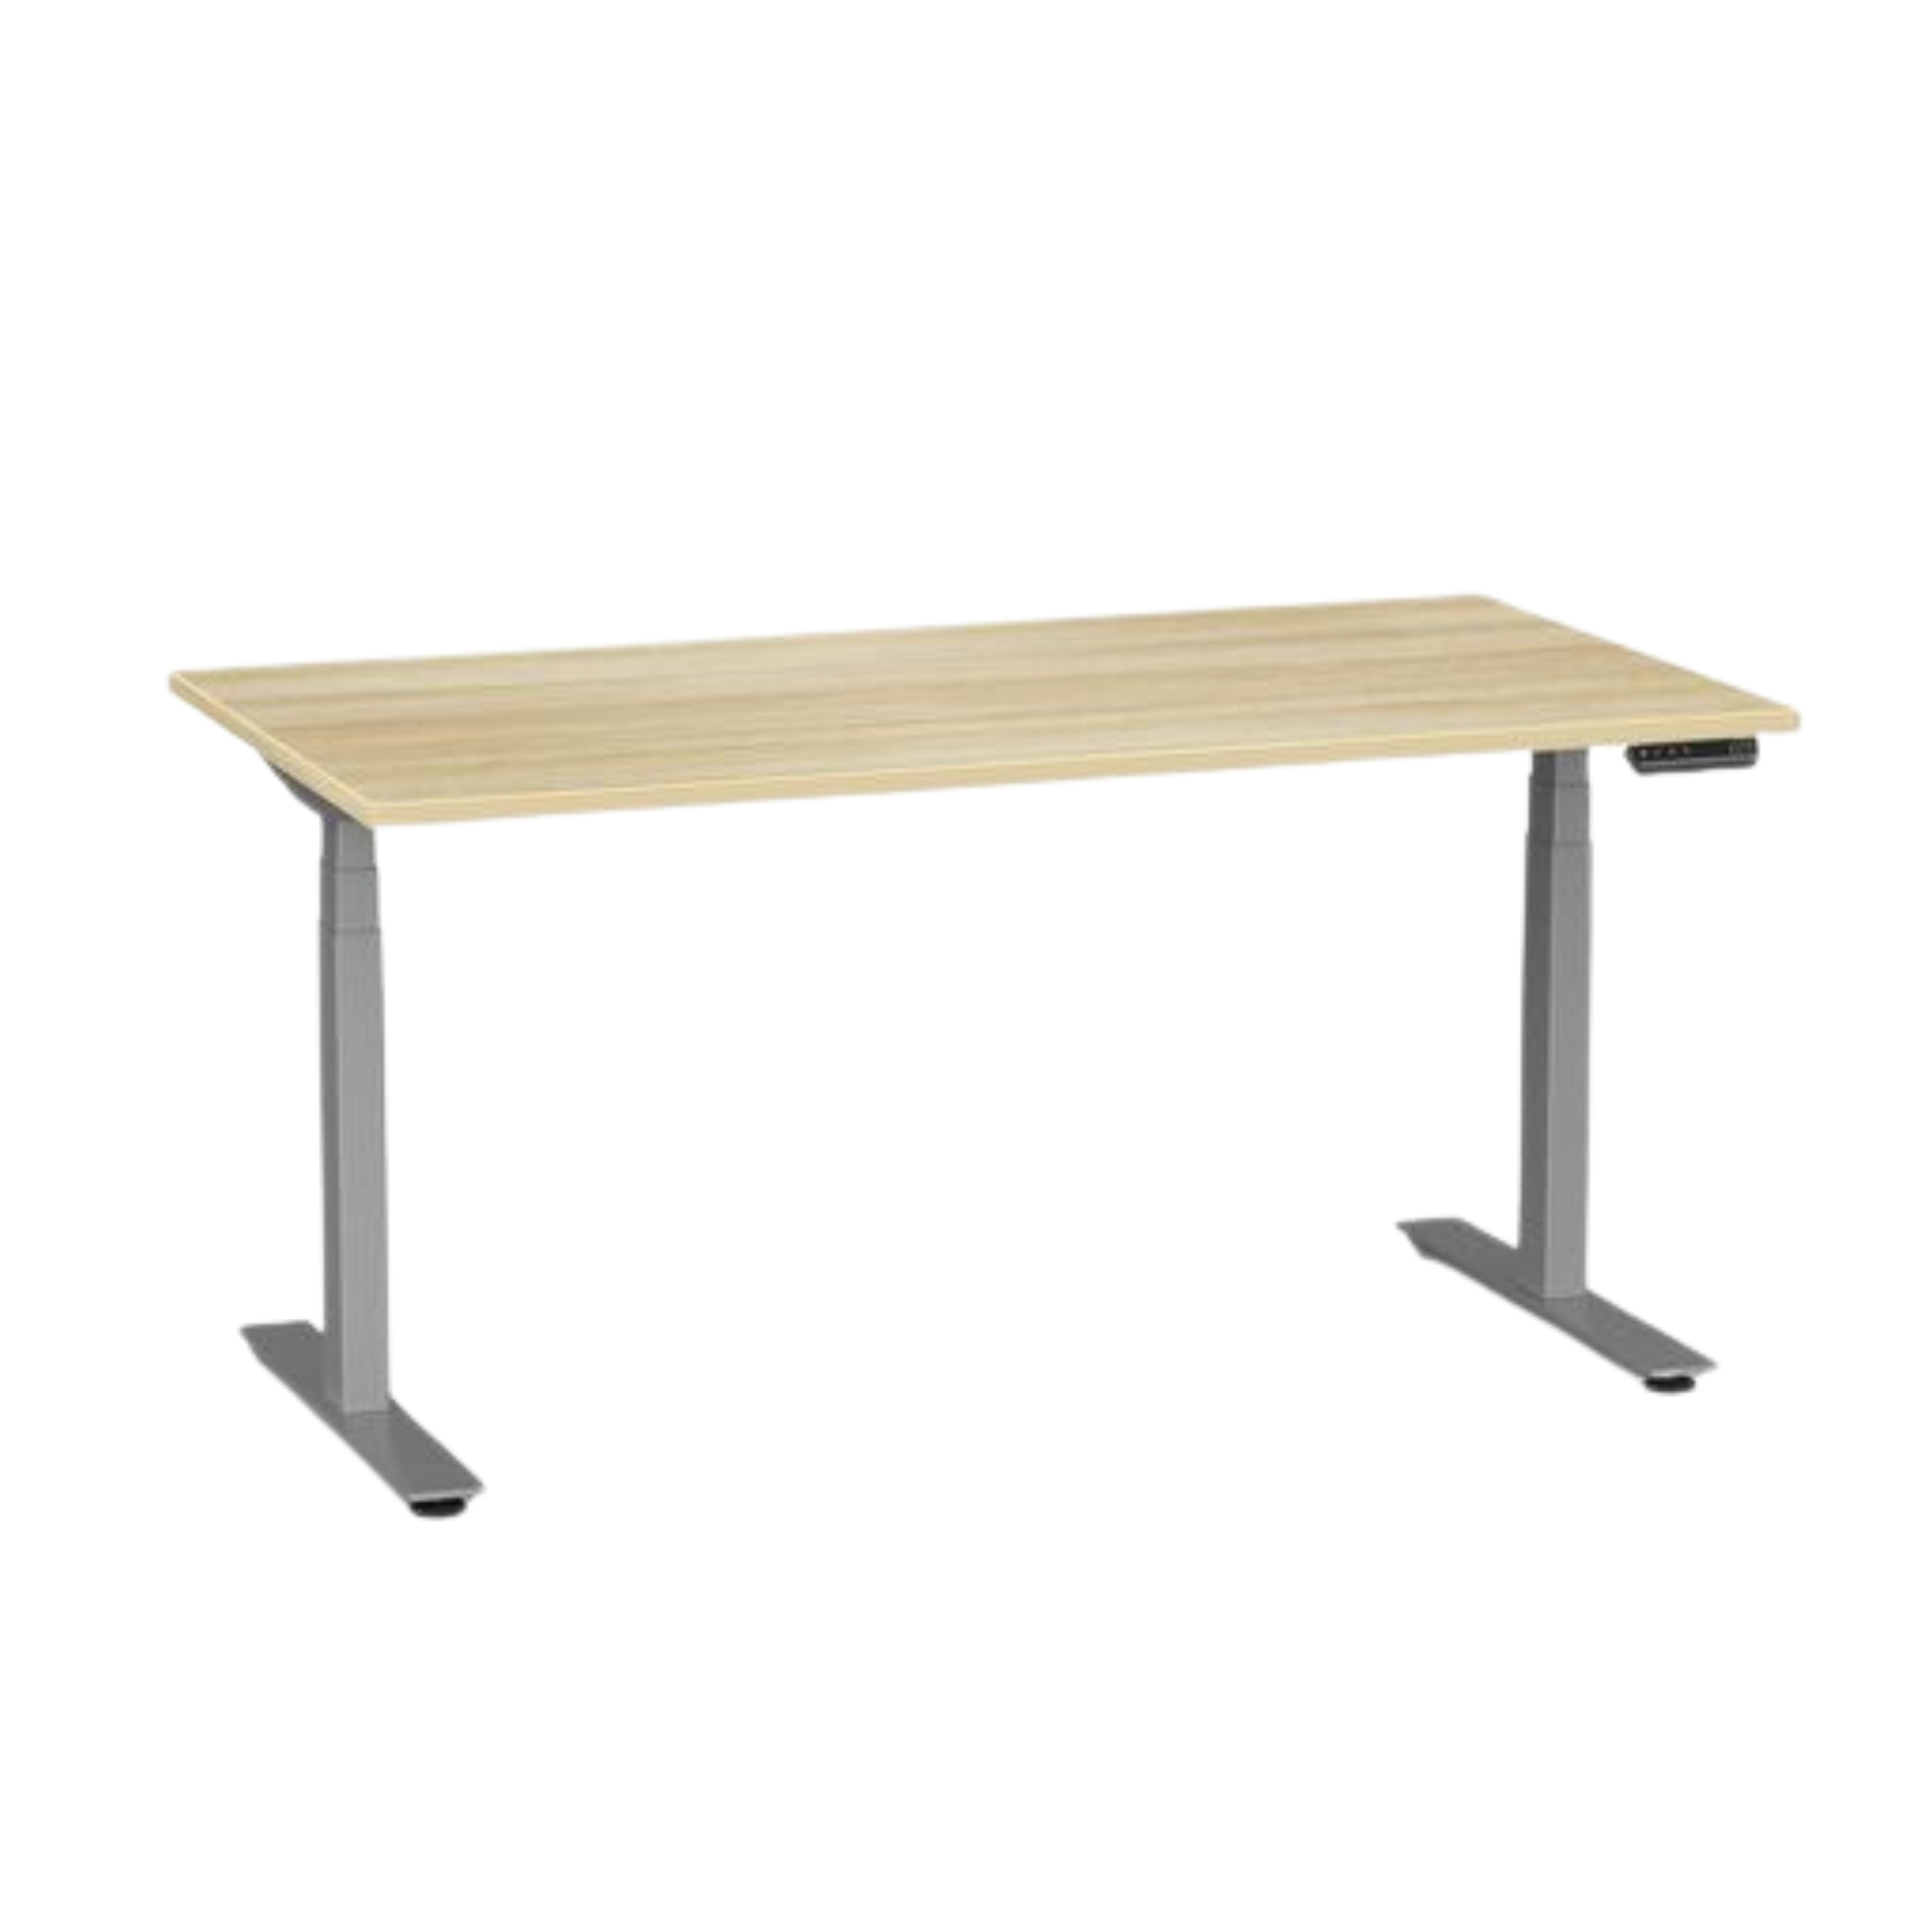 Agile Pro electric sit to stand desk with silver frame and atlantic oak top